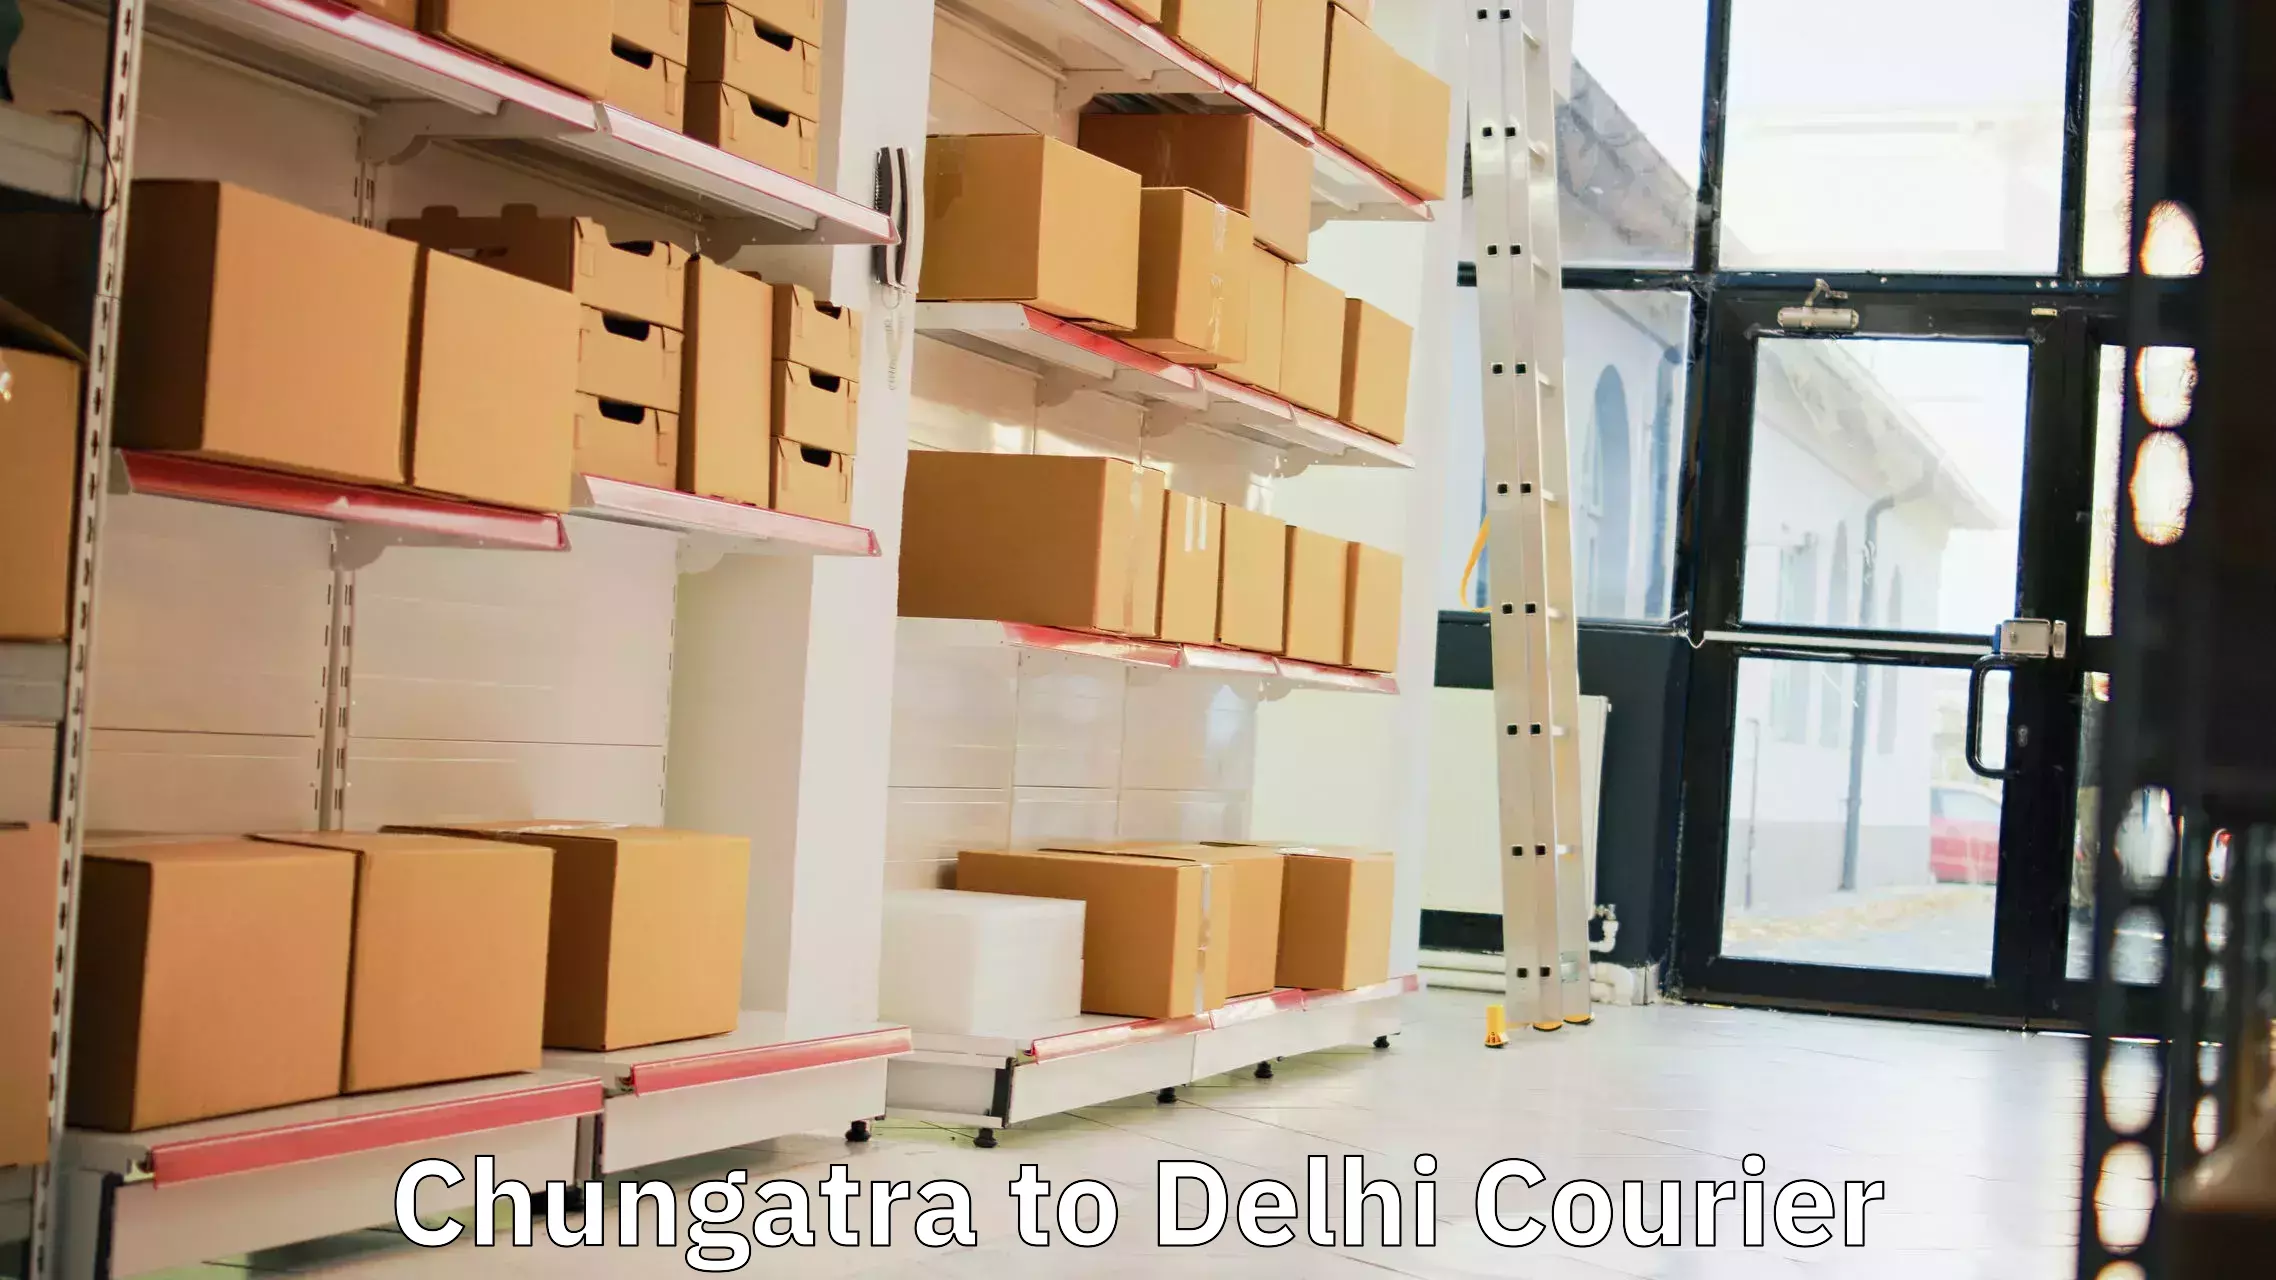 Expedited shipping solutions Chungatra to Lodhi Road